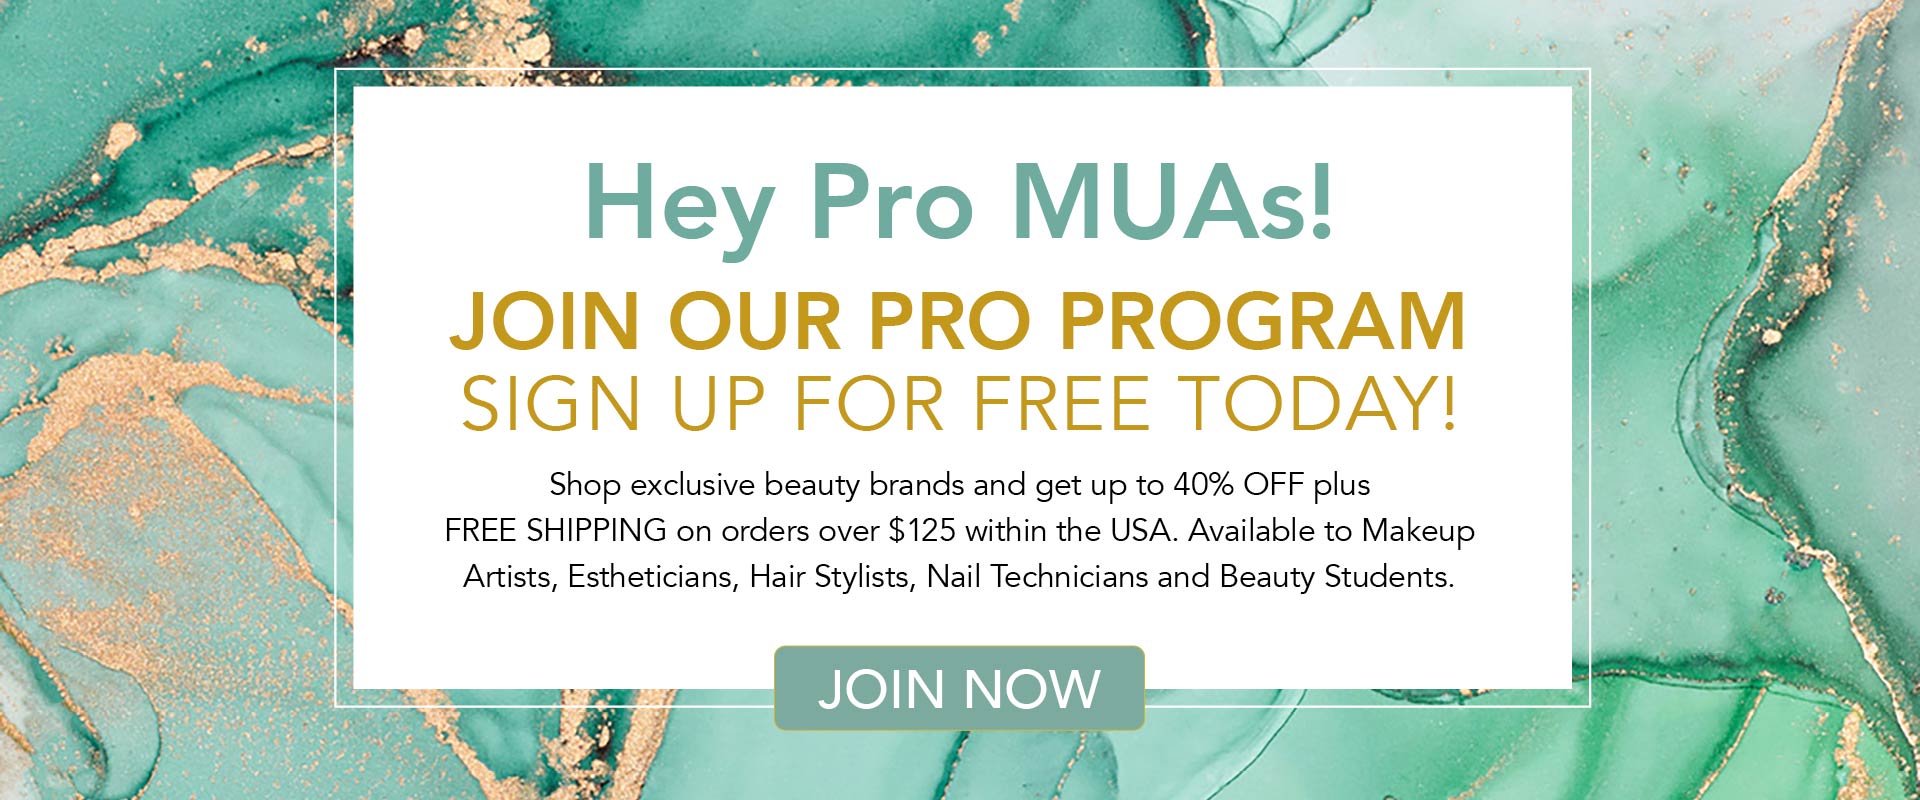 Hey Pro MUas! Join our pro program, sign up for free